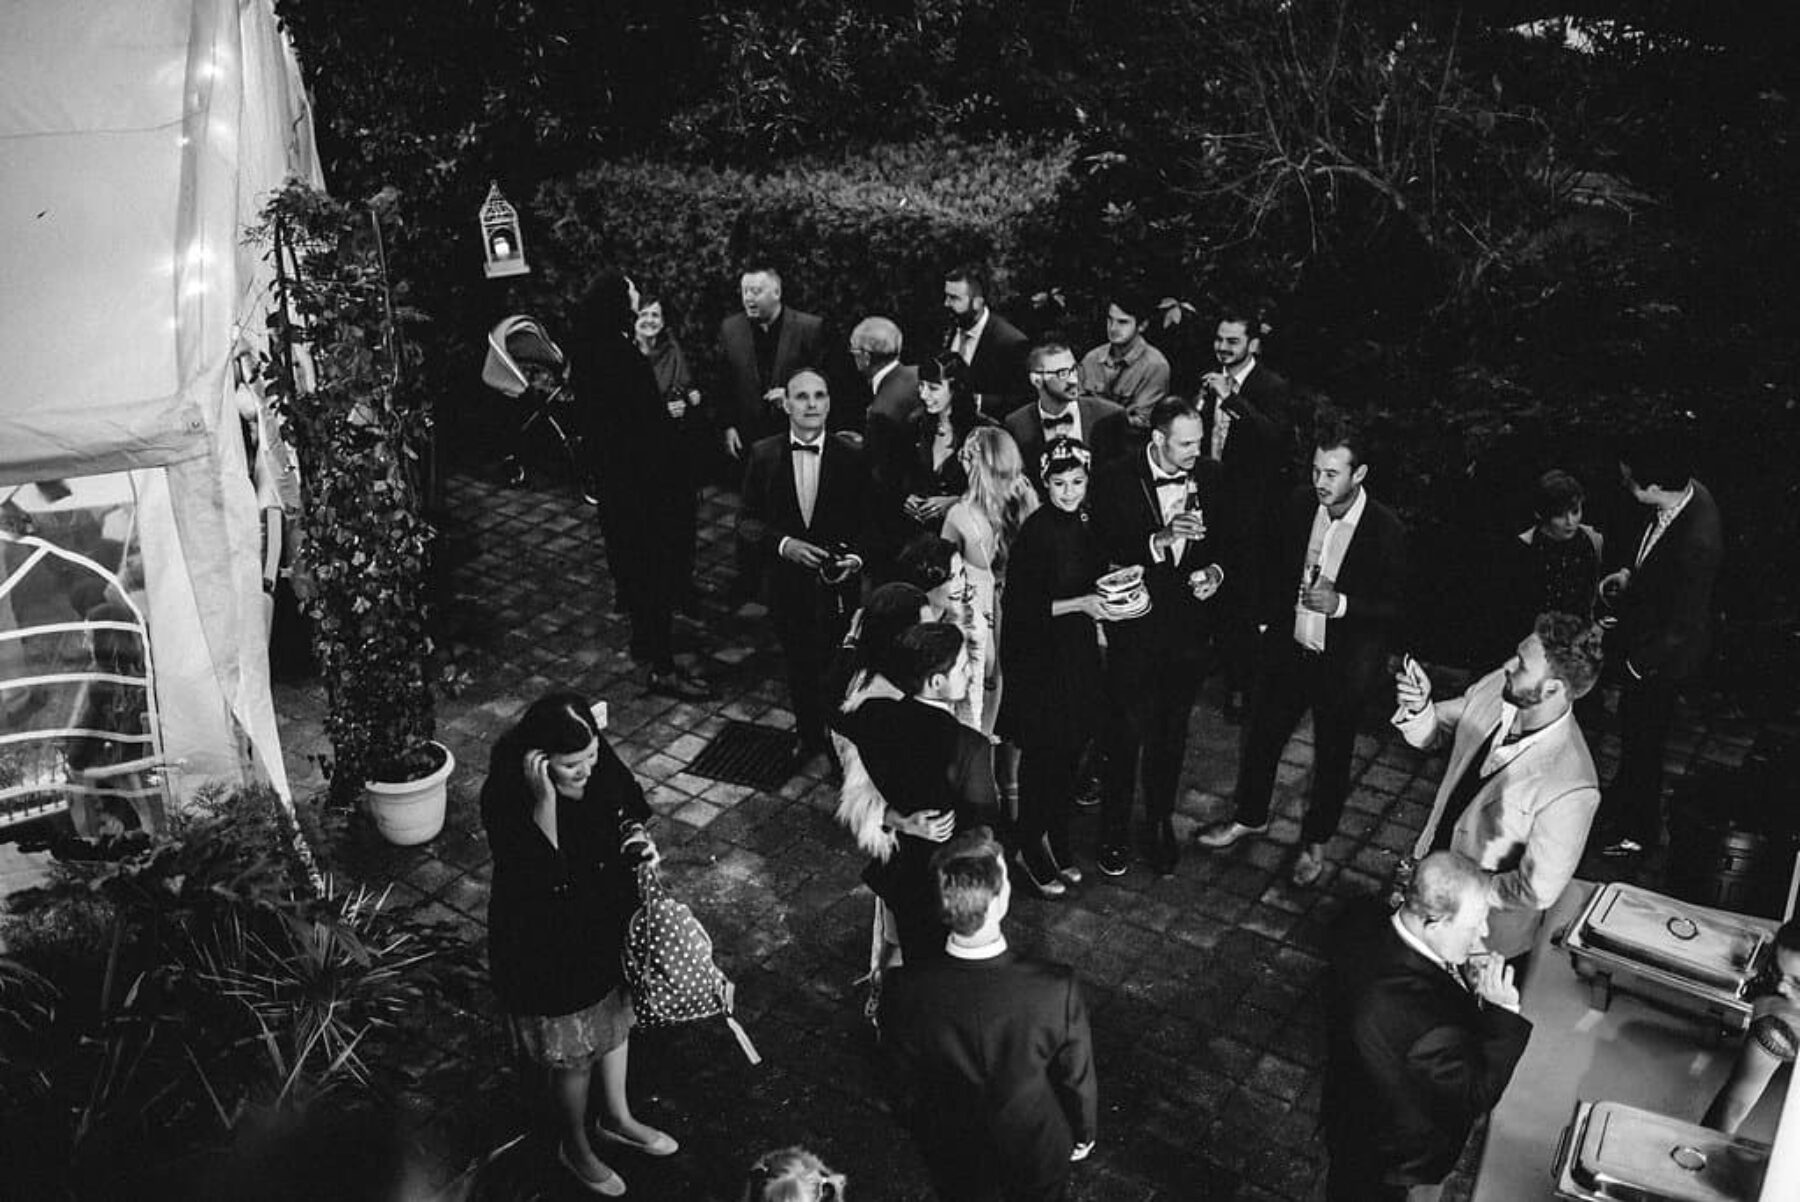 Quirky backyard wedding on a budget - photography by Fiona Vail